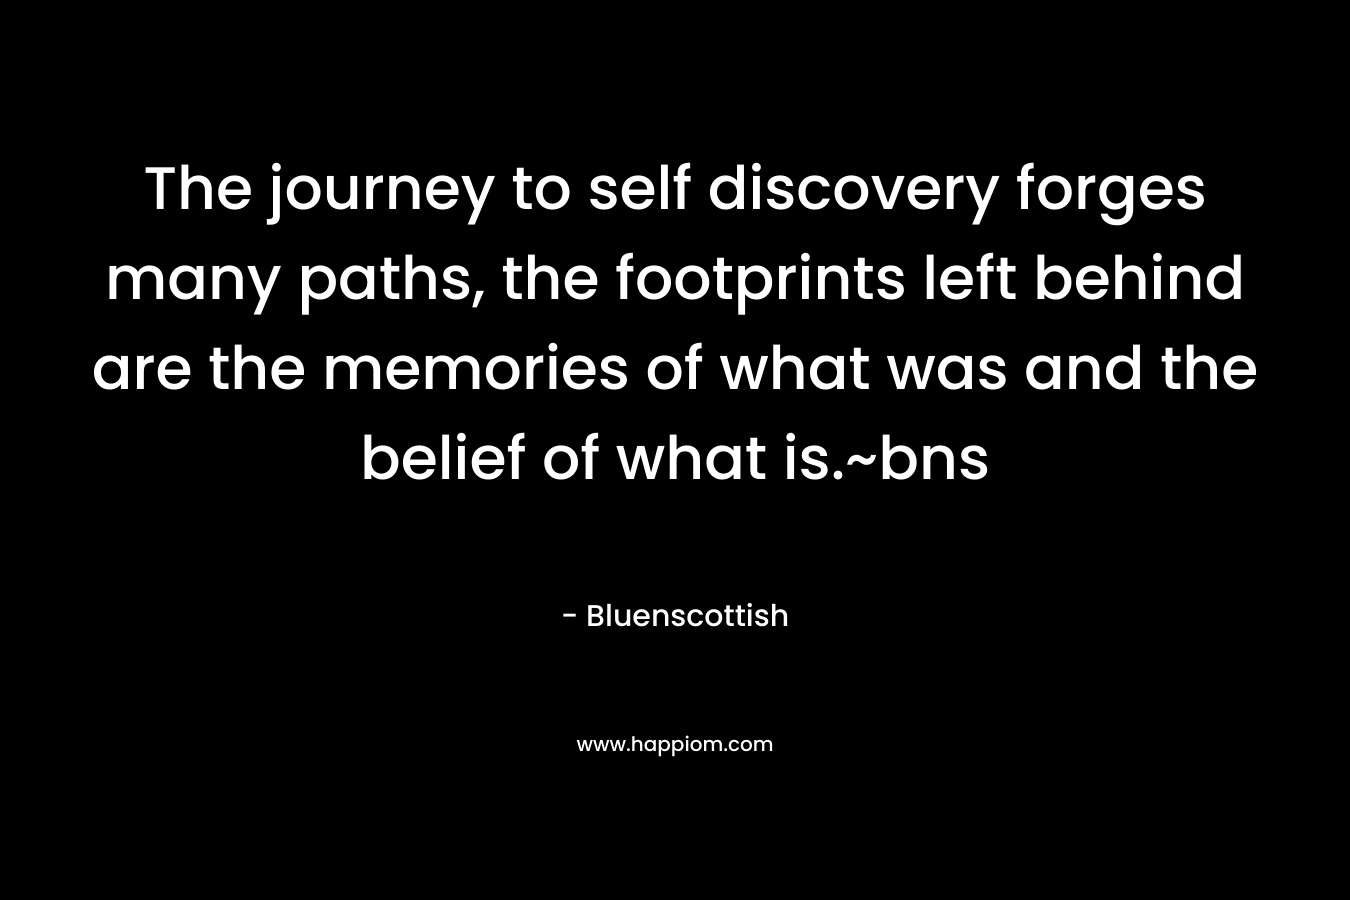 The journey to self discovery forges many paths, the footprints left behind are the memories of what was and the belief of what is.~bns